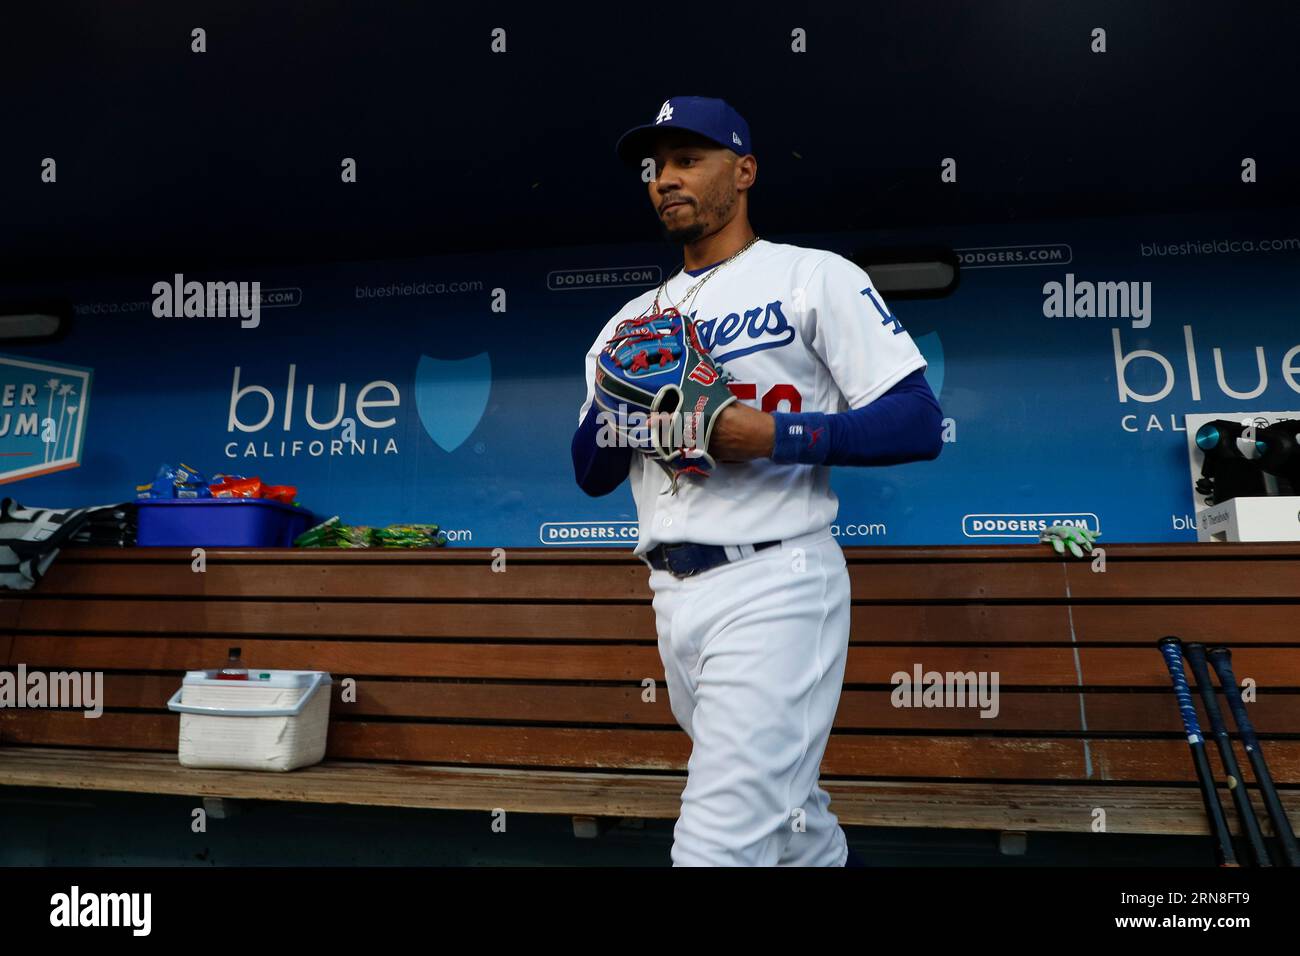 Los Angeles Dodgers second basemen Mookie Betts (50) in the dugout prior to a regular season game between the Arizona Diamondbacks and Los Angeles Dod Stock Photo